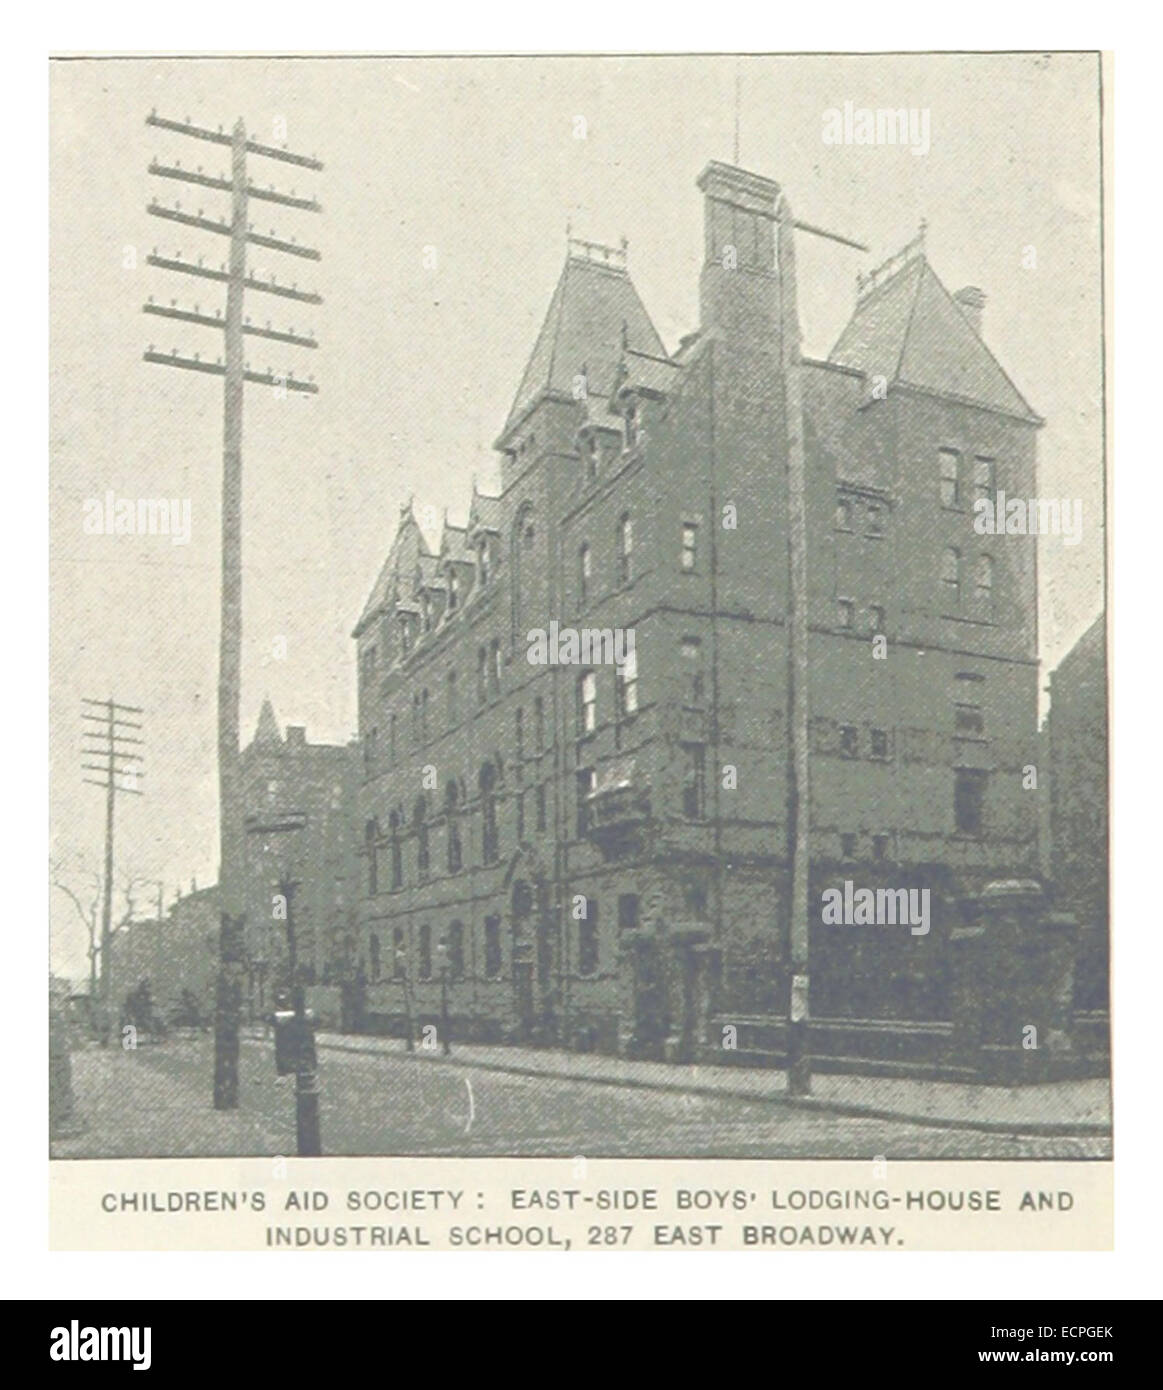 (King1893NYC) pg434 CHILDREN'S AID SOCIETY. EAST-SIDE BOYS- LODGING-HOUSE AND INDUSTRIAL SCHOOL, 287 EAST BROADWAY Stock Photo